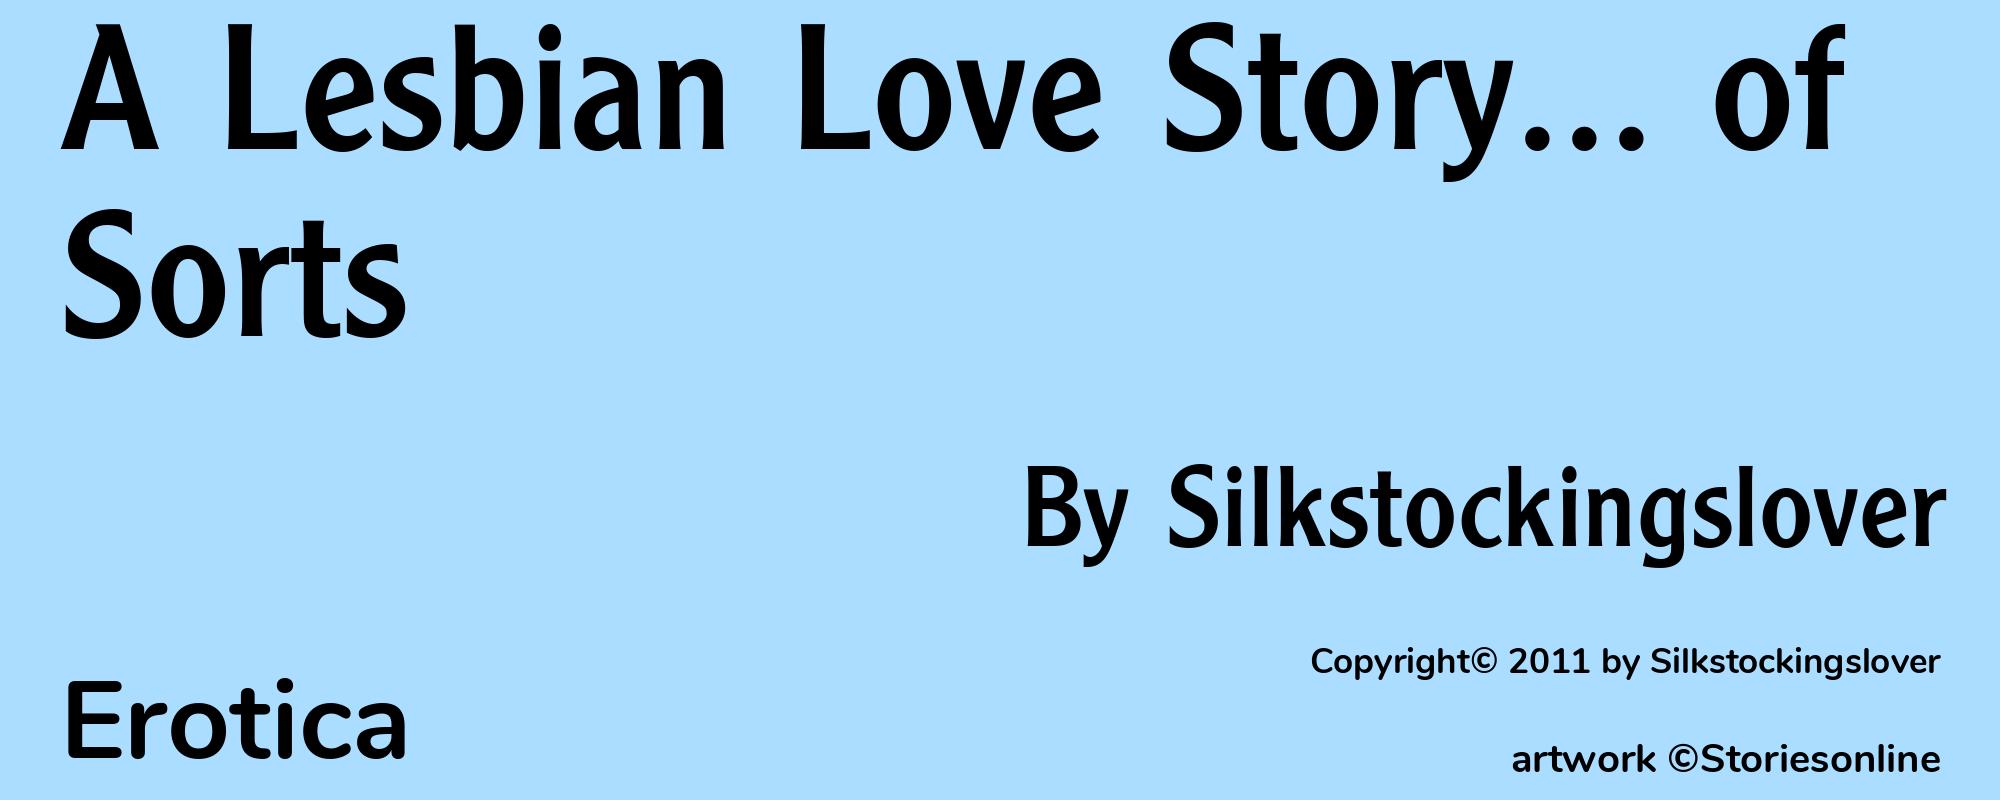 A Lesbian Love Story... of Sorts - Cover